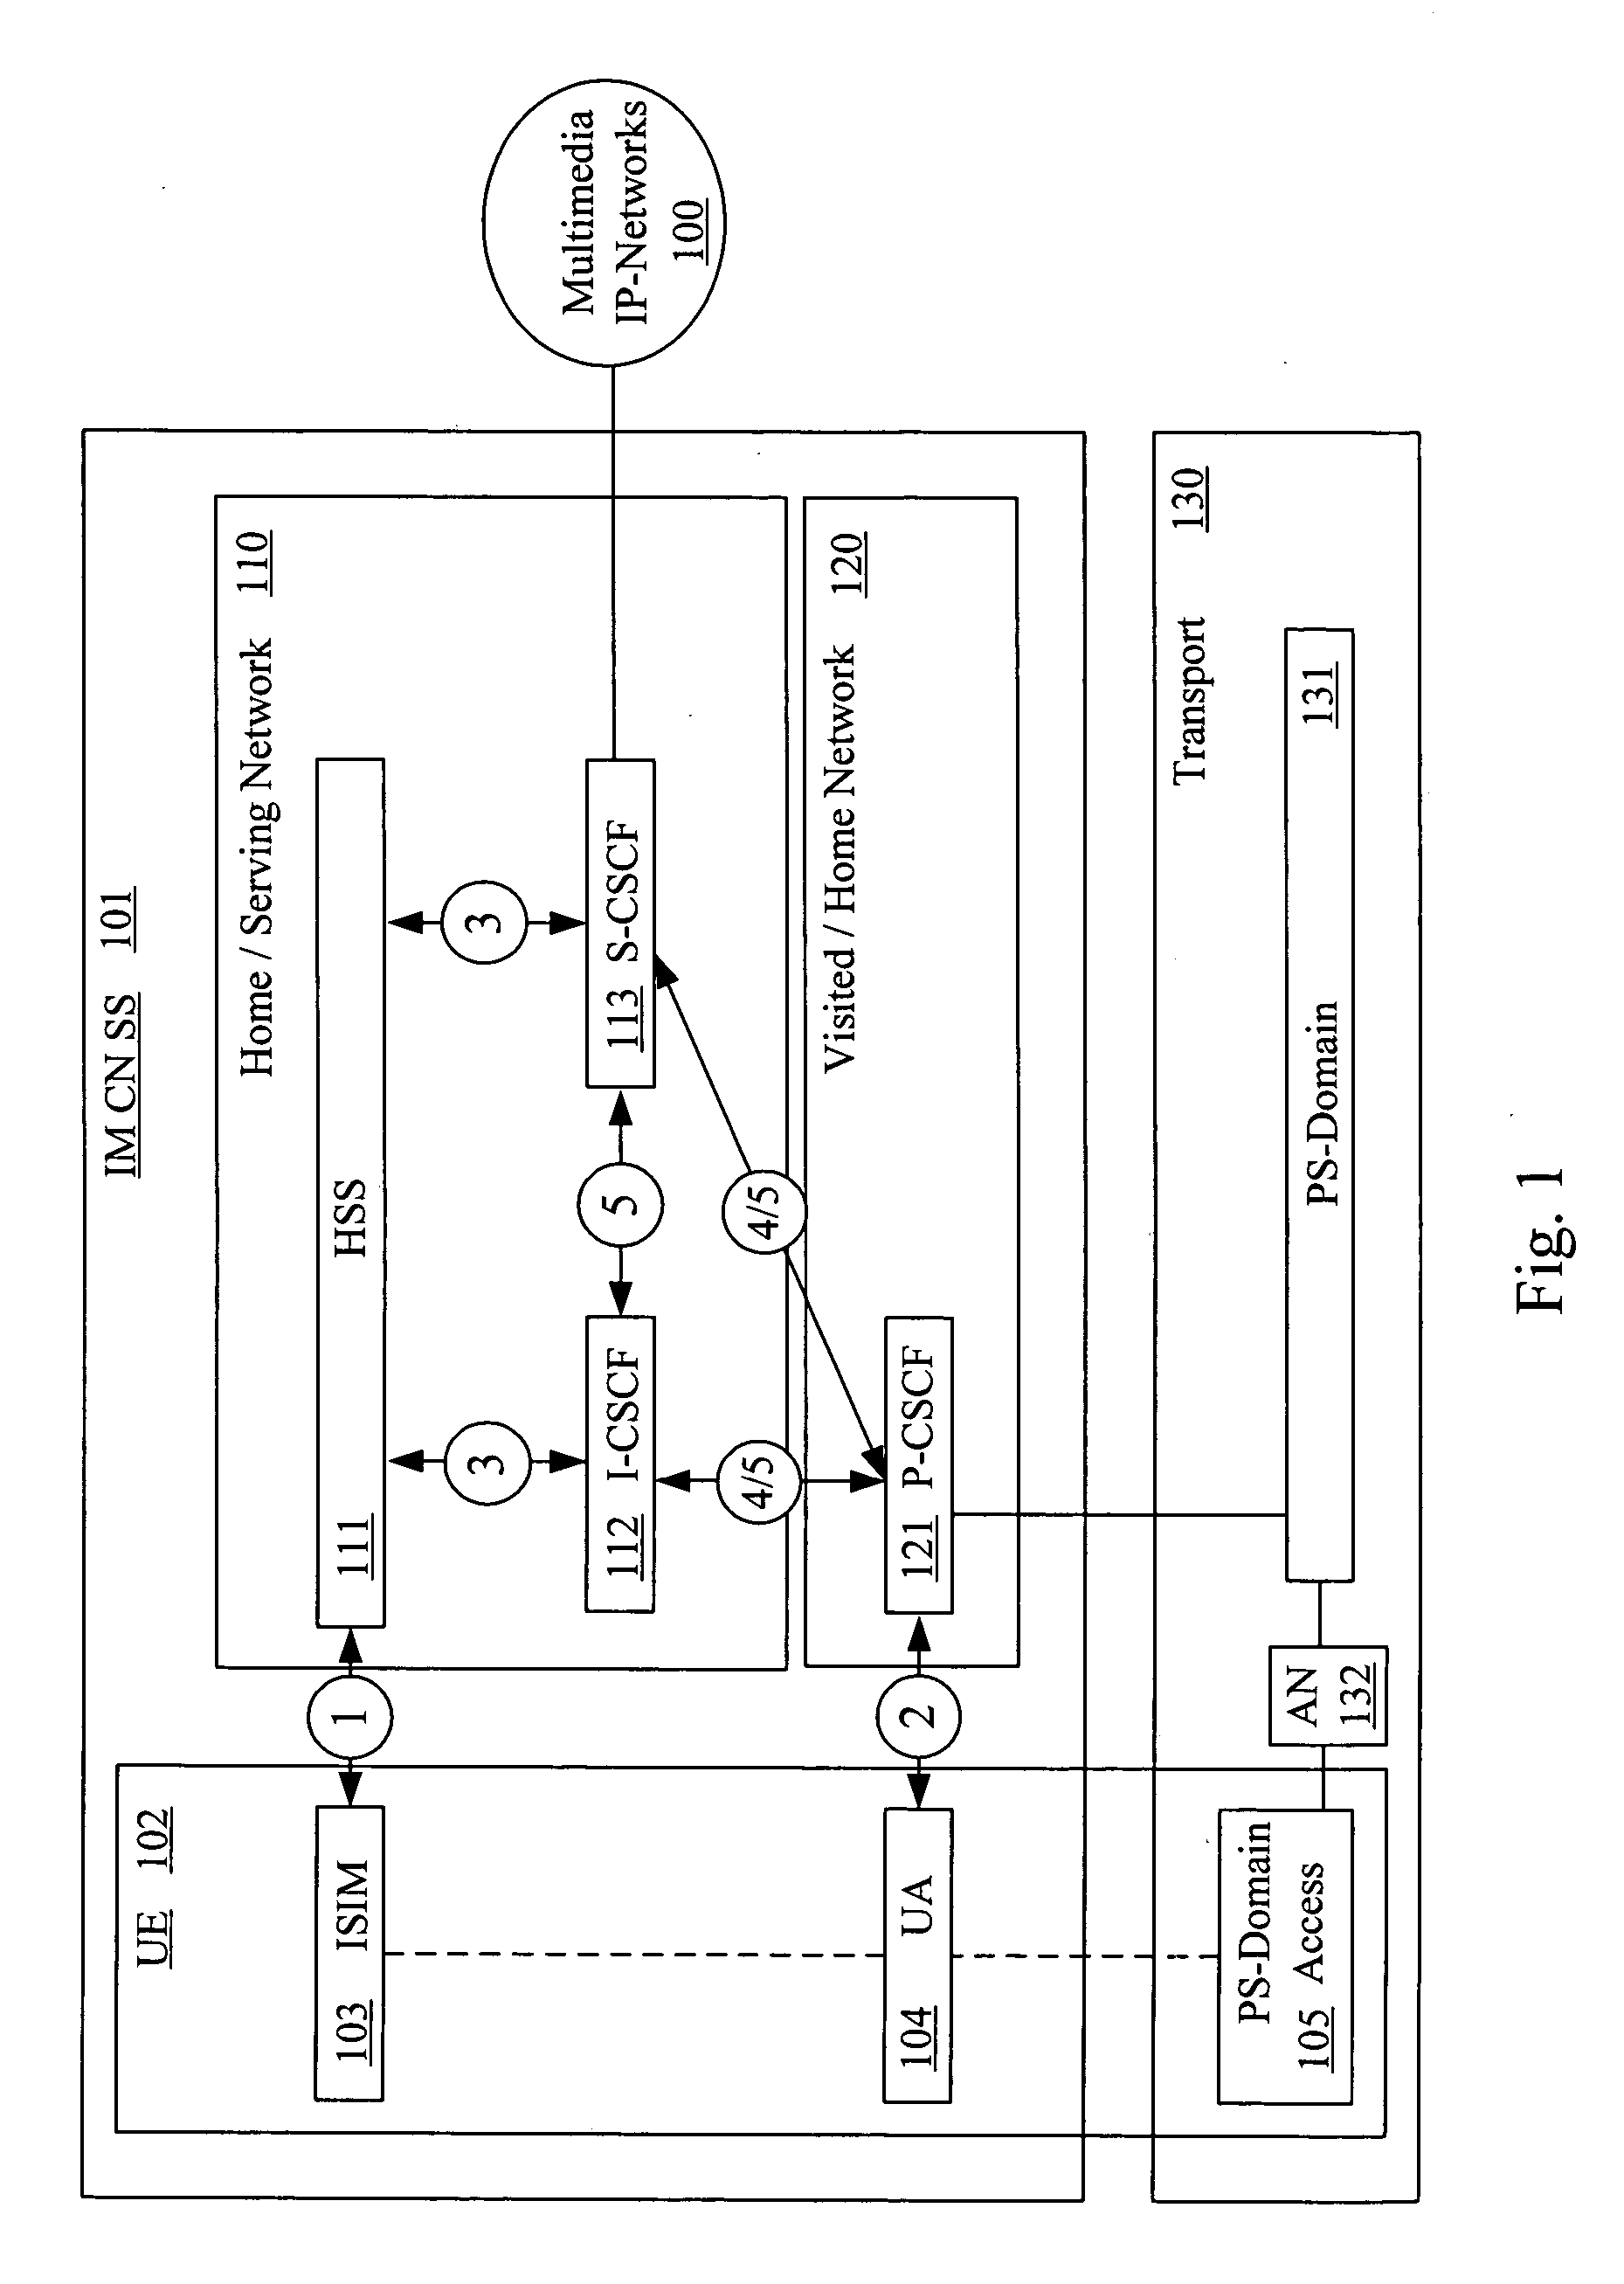 Handling of identities in a trust domain of an IP network